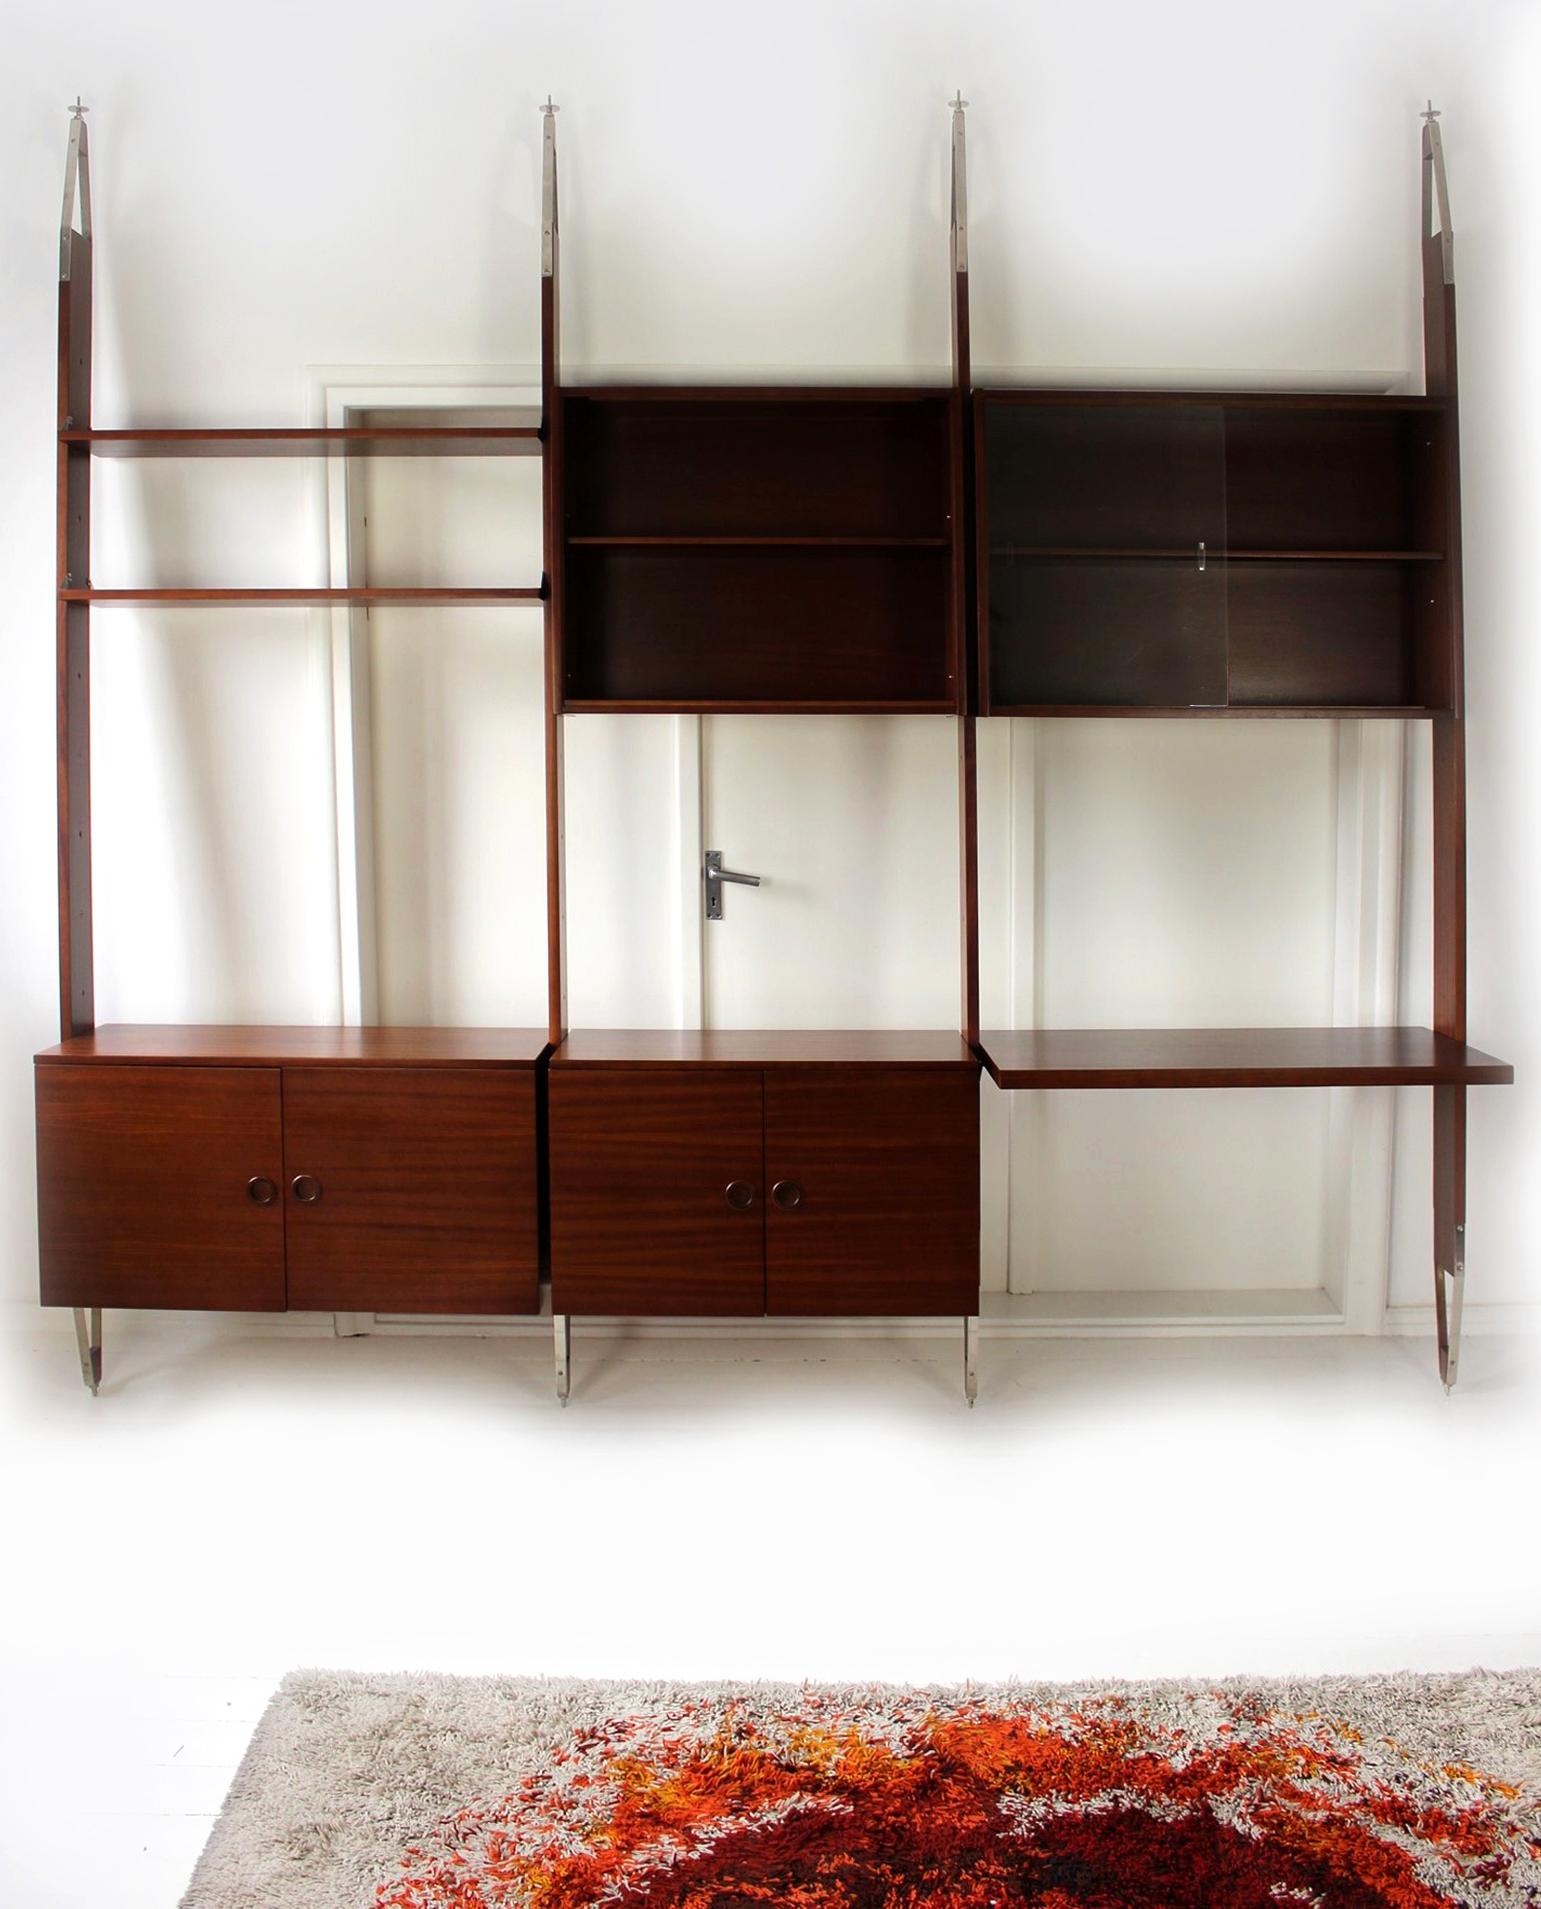 
This mahogany modular wall unit was manufactured by Jitona in the Czech Republic in 1973. It consists of 2 cabinets, 2 display cabinets, 2 shelves and a desk. The design allows for any arrangement of these elements, so we can choose the most